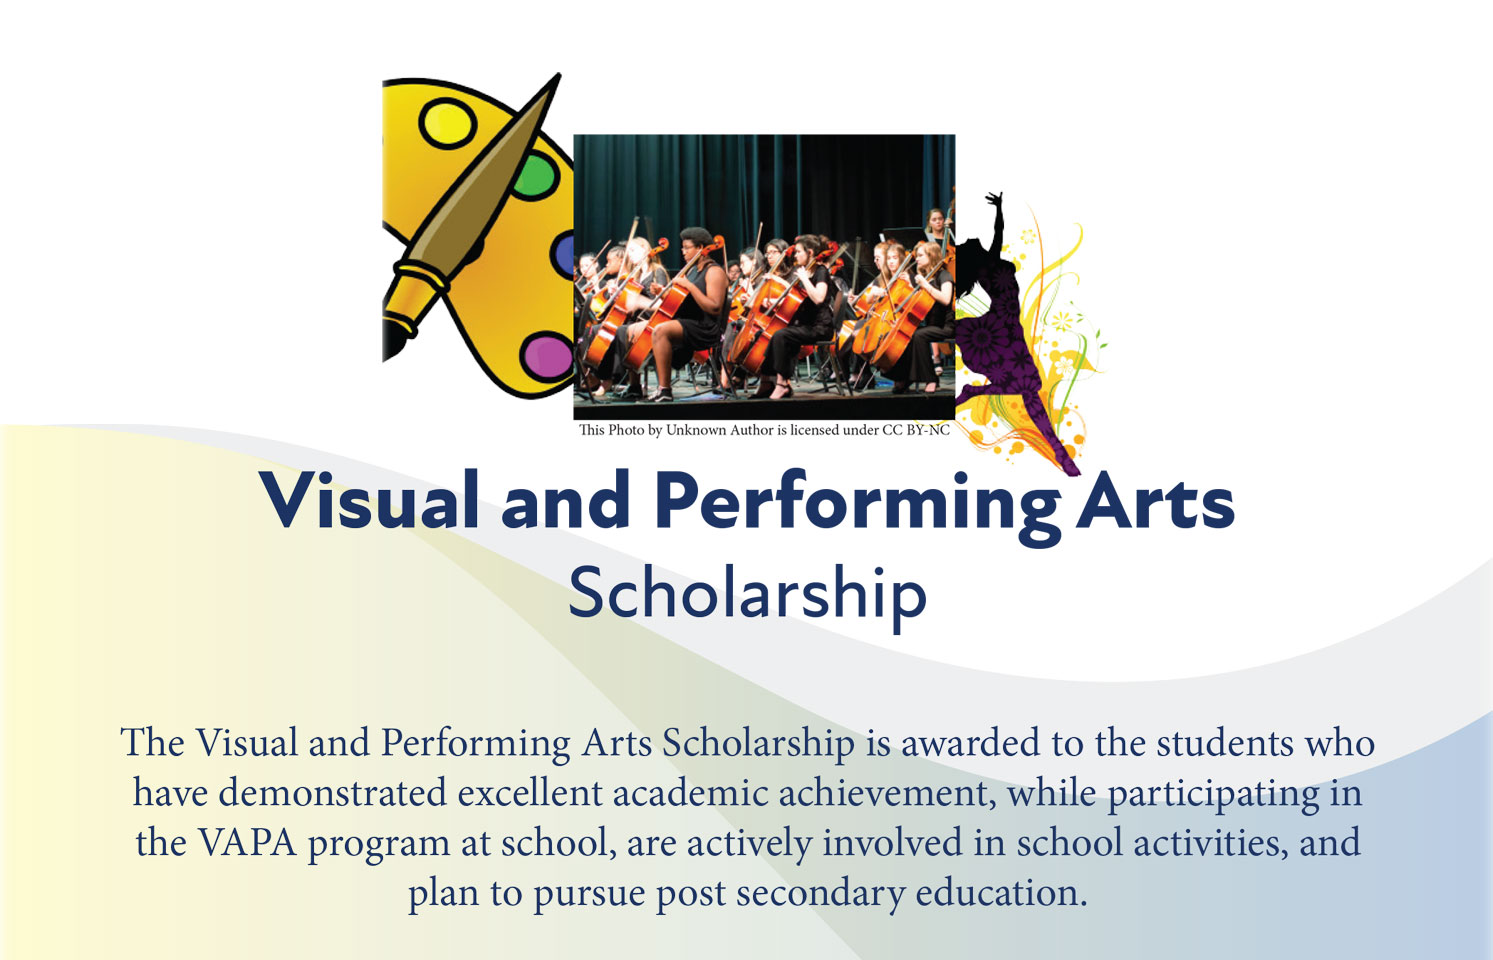 CSVPA Cambridge School of Visual & Performing Arts - We are proud to  announce are new scholarships for students in Brazil and Latin America. For  more details visit  #scholarships  #artschool